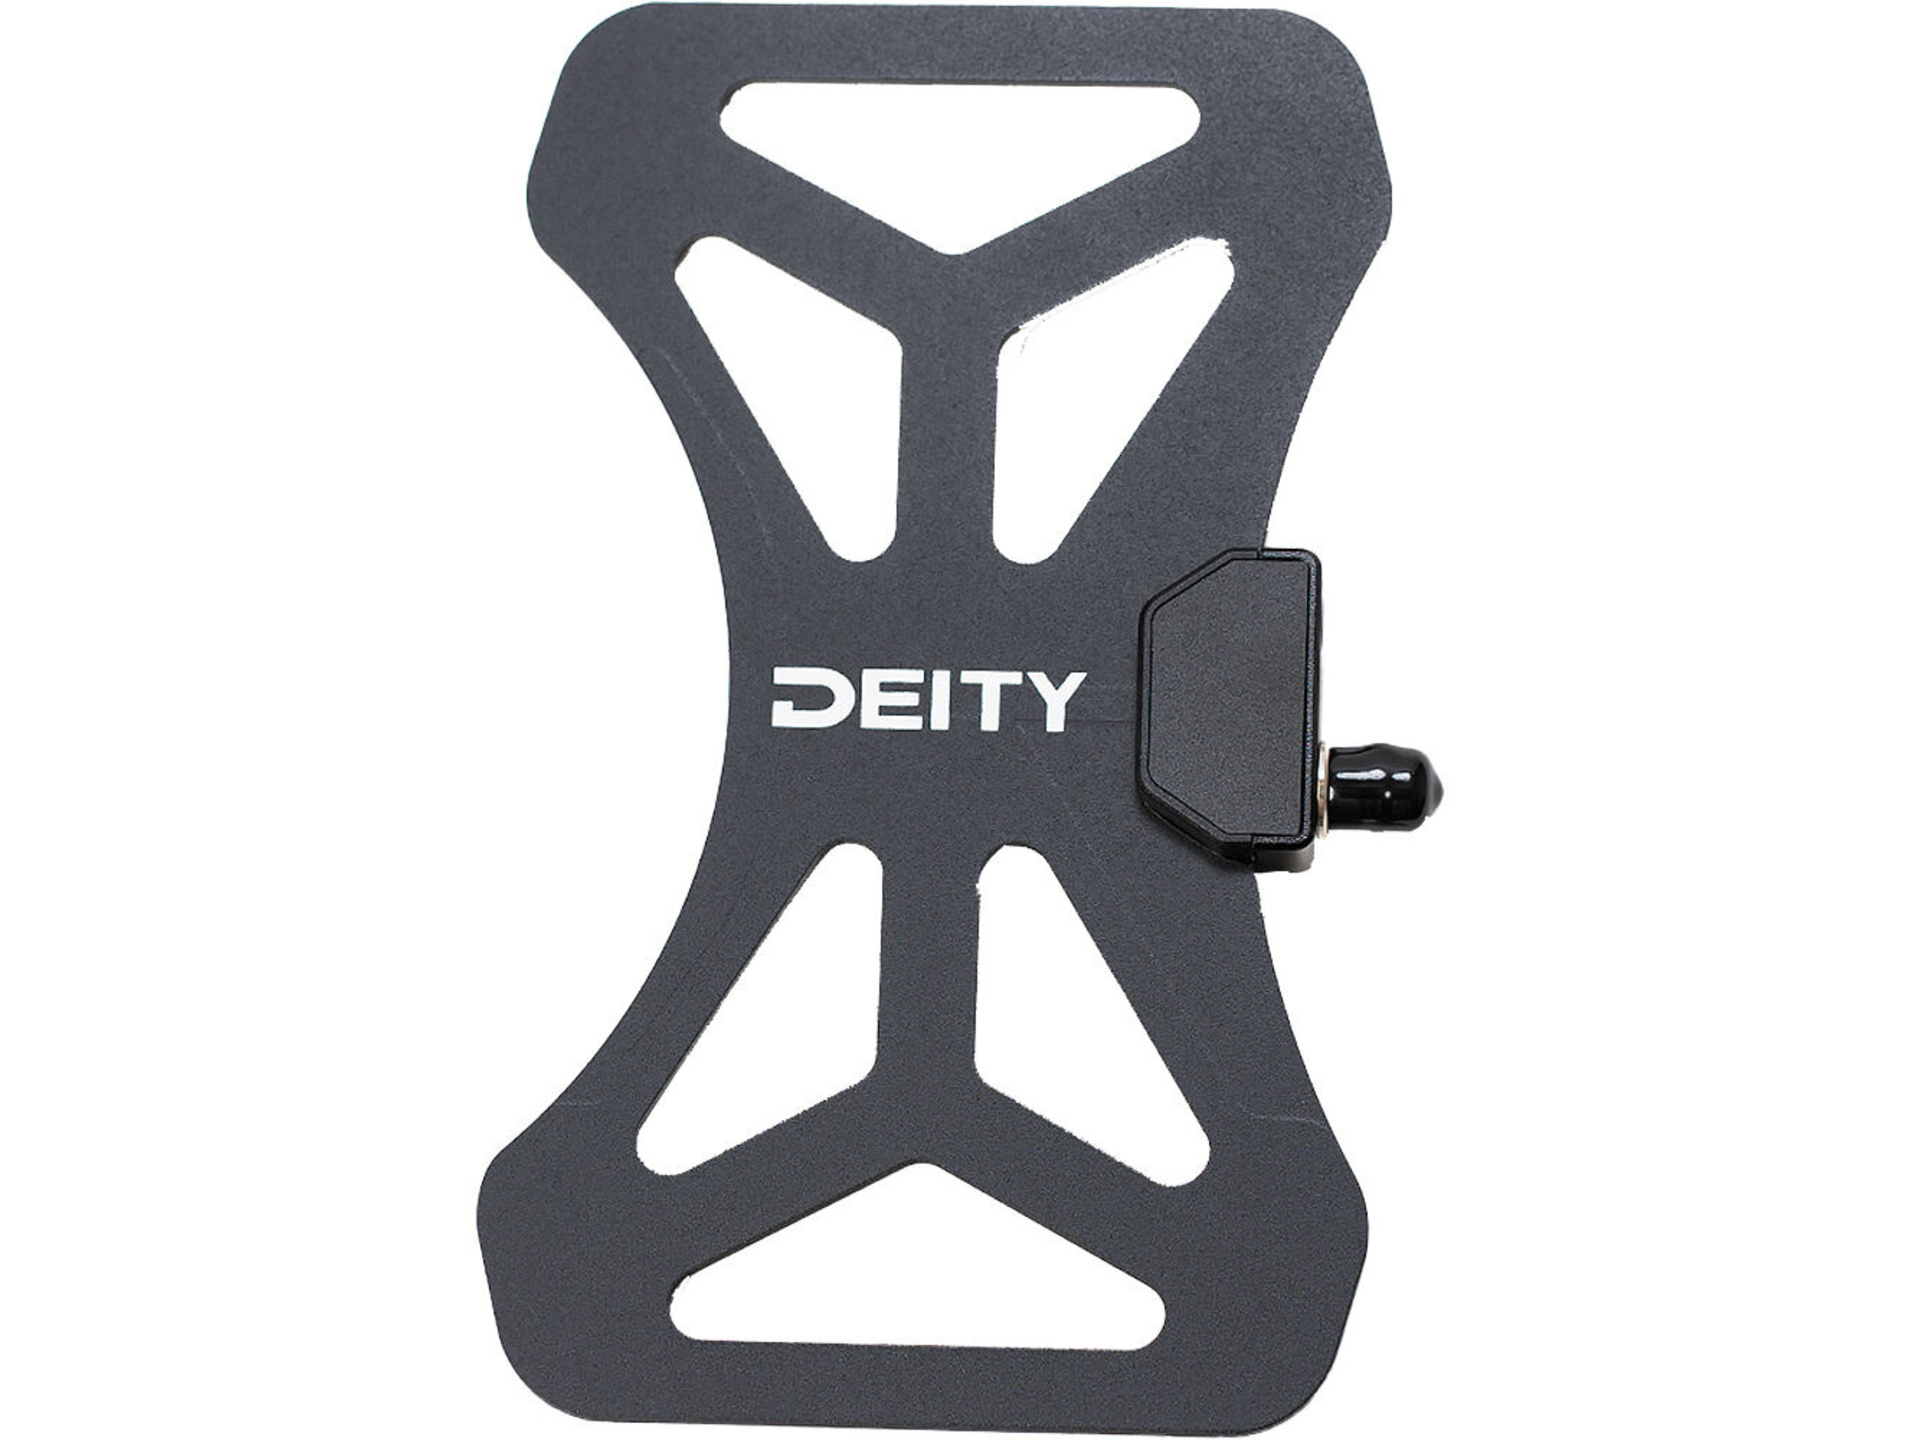 Deity Microphones BF1 Passive Omnidirectional Butterfly Antenna (Pair, 470 MHz to 1 GHz)